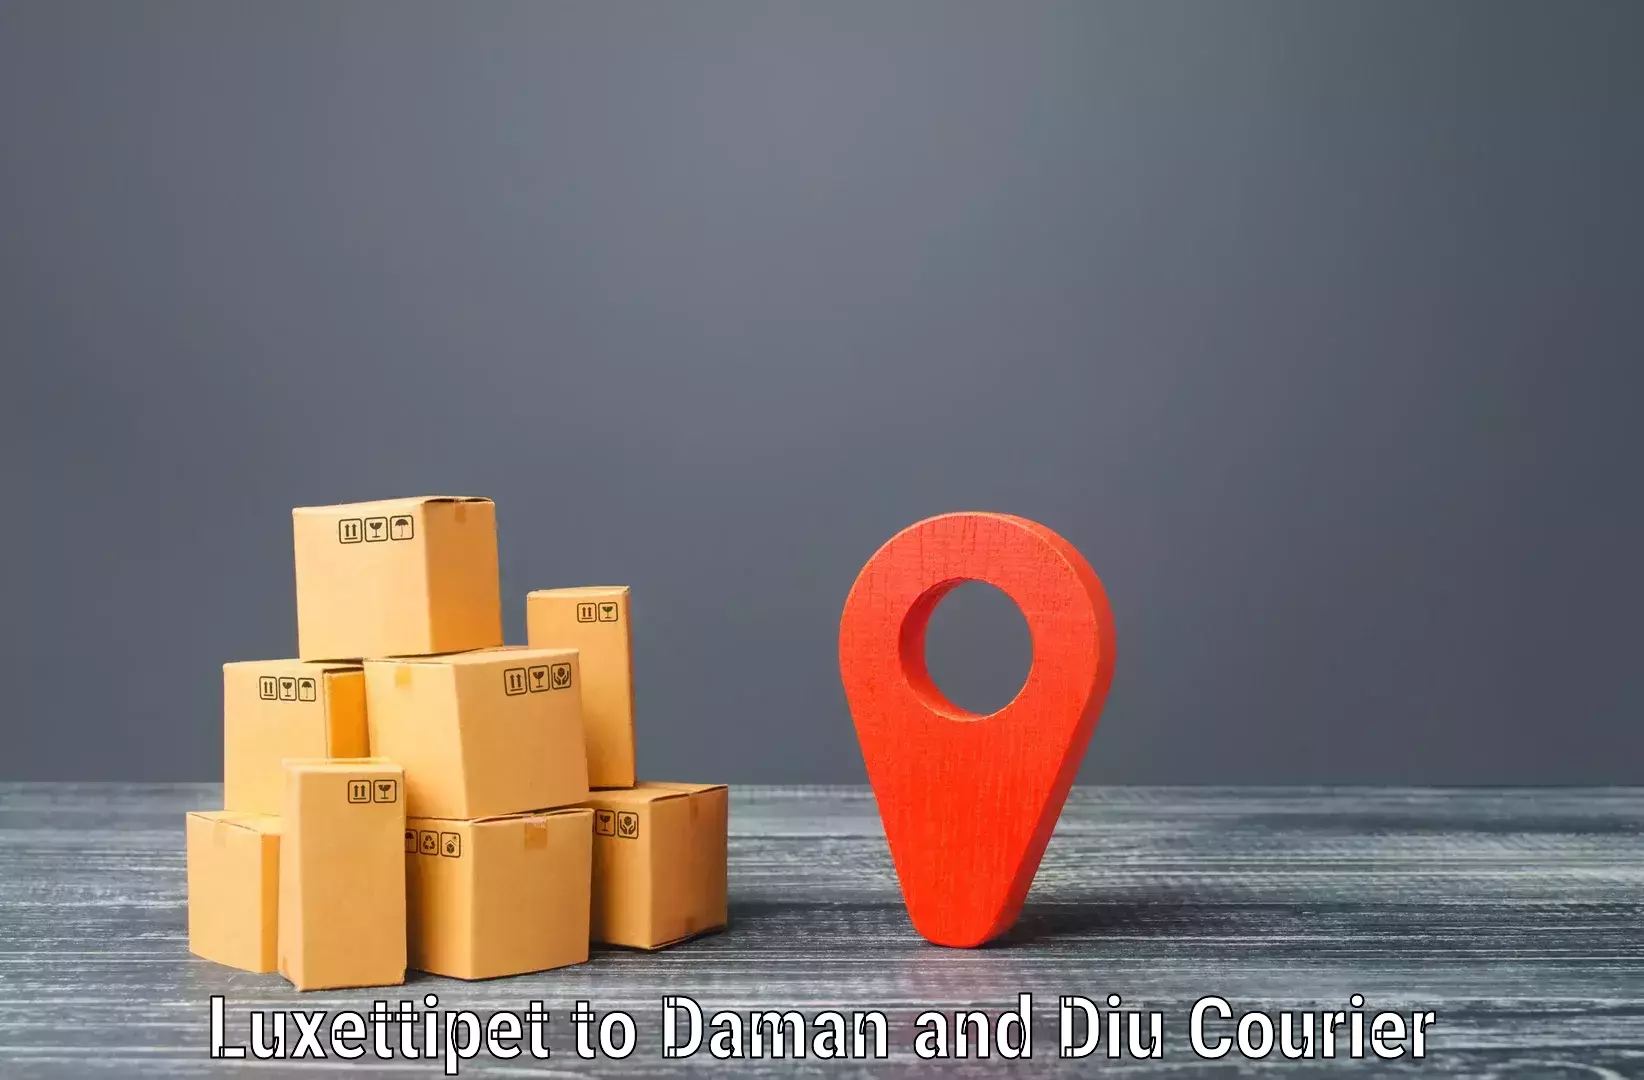 Lightweight parcel options Luxettipet to Daman and Diu